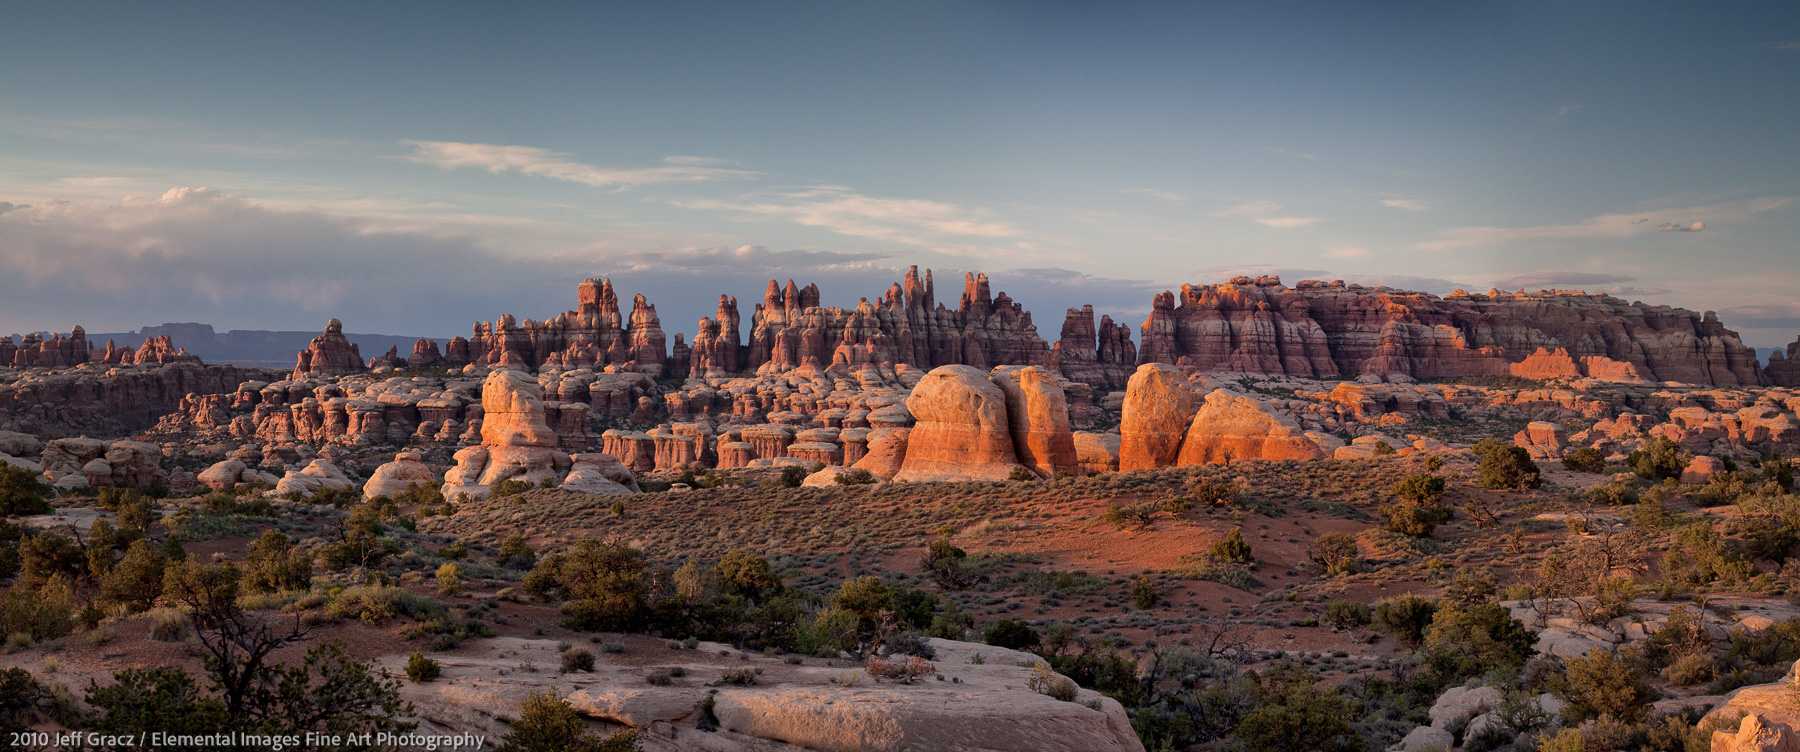 The Needles from Butler Flat | Canyonlands National Park | UT | USA - © 2010 Jeff Gracz / Elemental Images Fine Art Photography - All Rights Reserved Worldwide